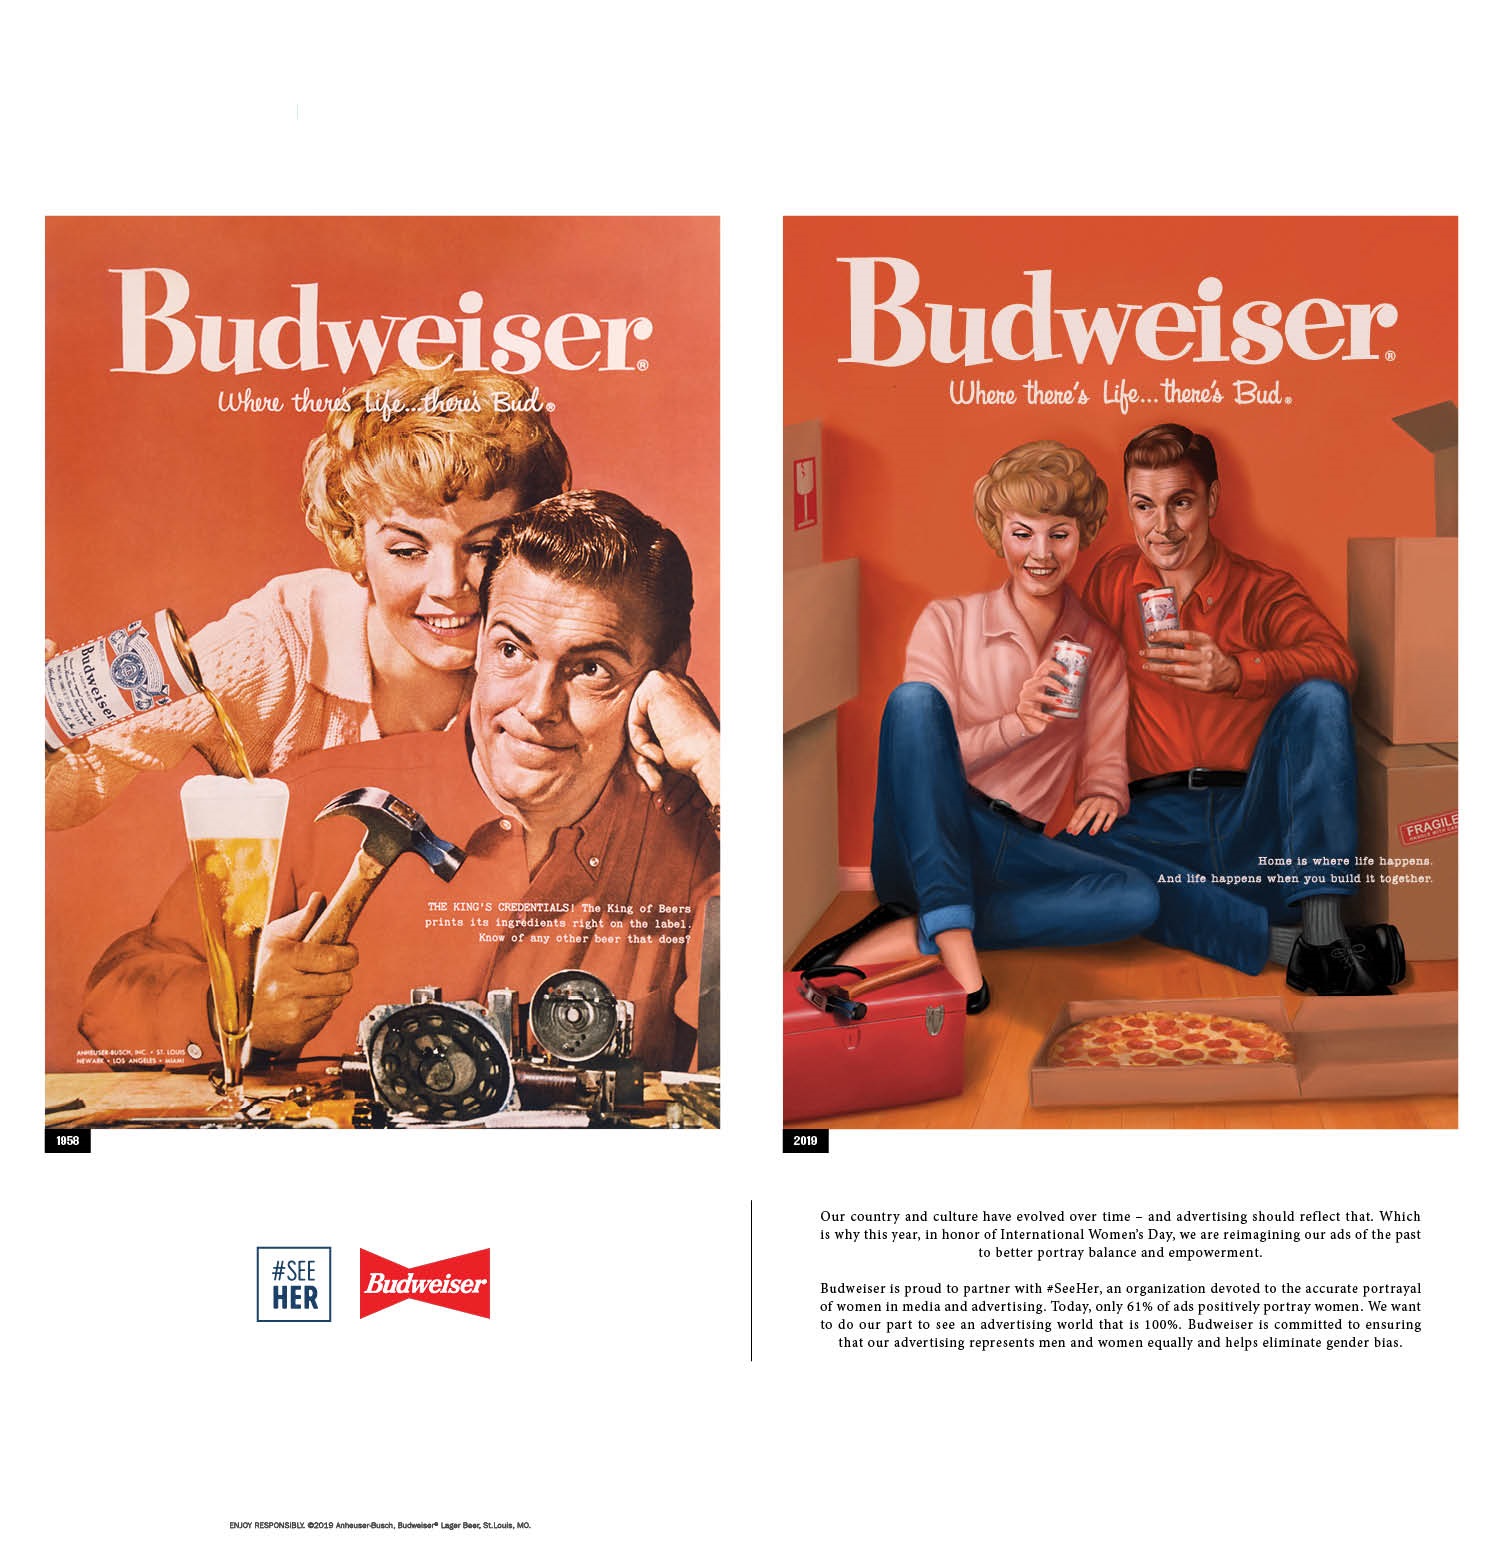 Budweiser recreated ads from the 1950s